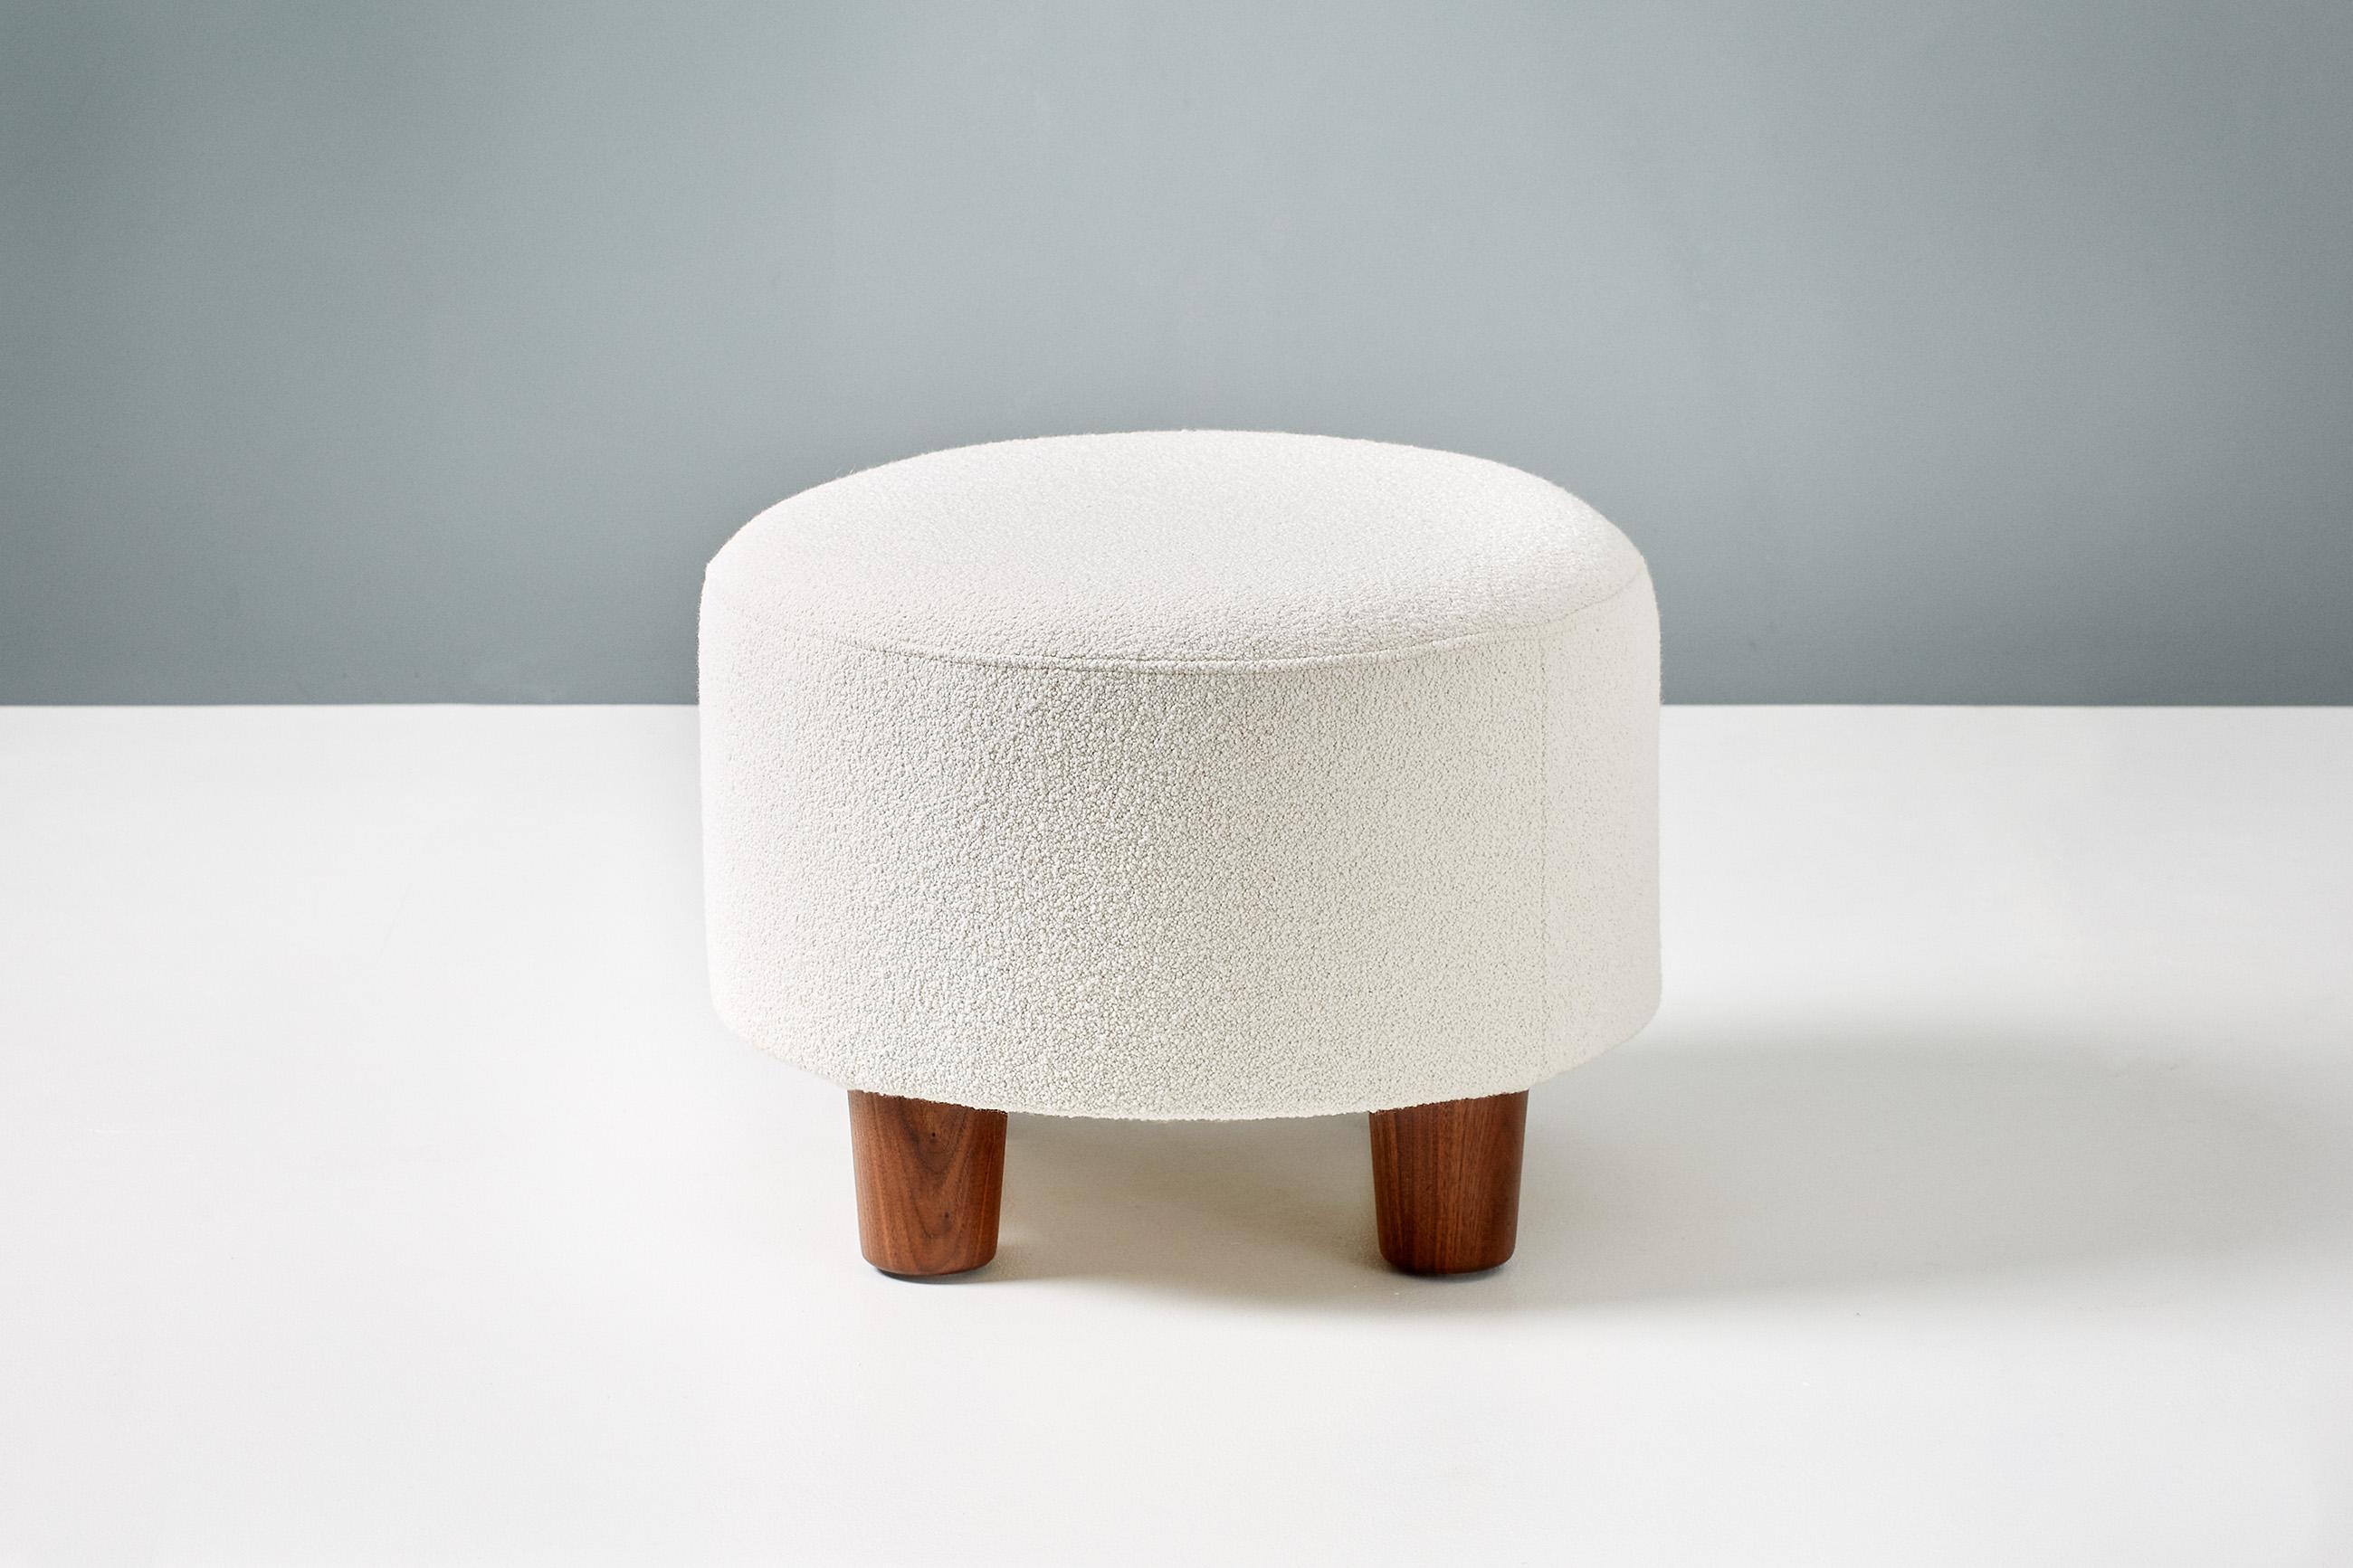 A round, custom made shearling ottoman on hardwood base with oiled walnut legs. The foam body is covered in premium, cotton-wool blend boucle fabric. 

These items are made to order in our London workshop, multiple pieces are available by request.